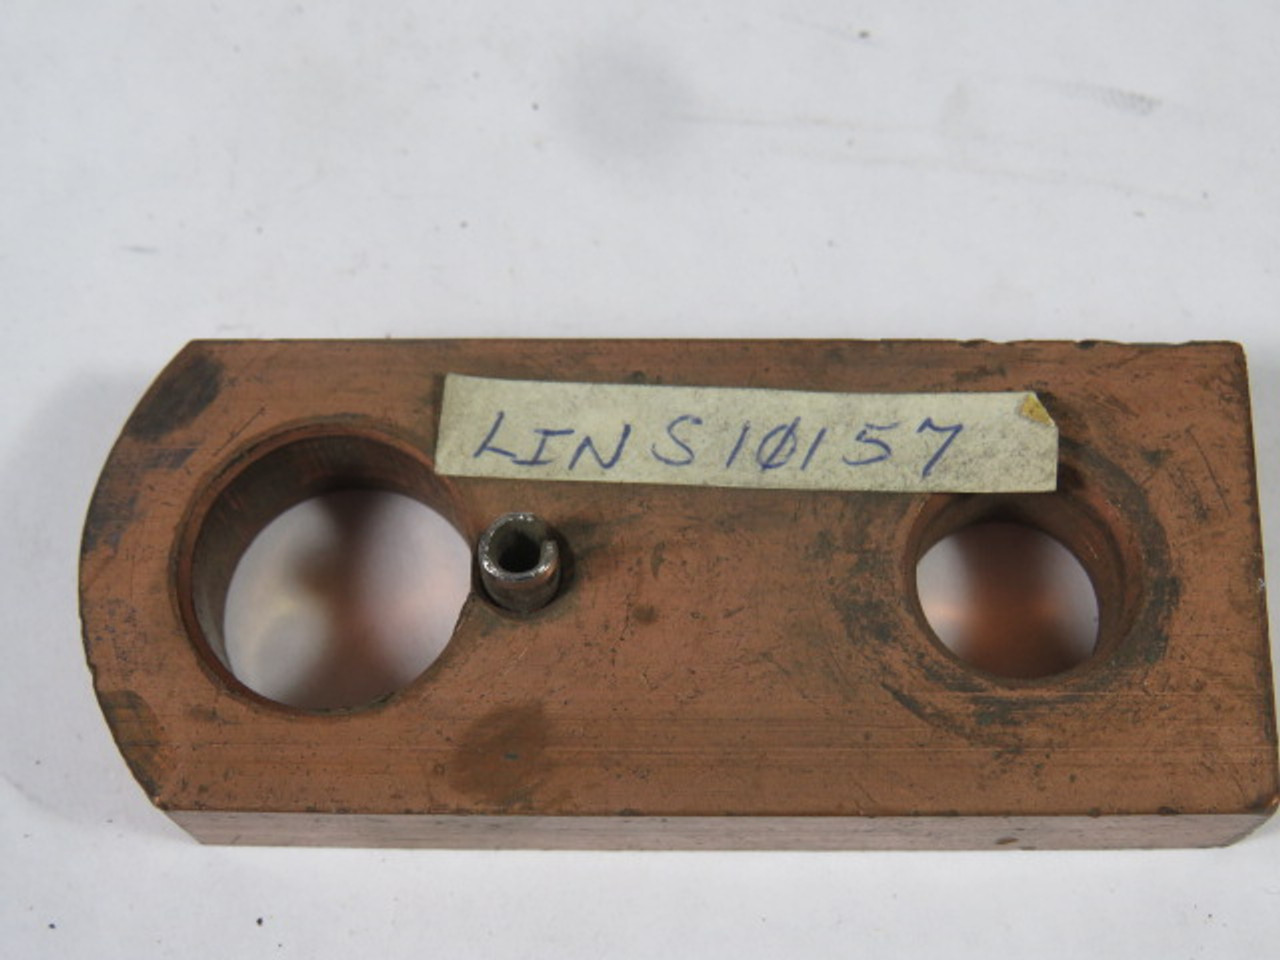 Lincoln Electric LINS10157 Nozzle Body USED